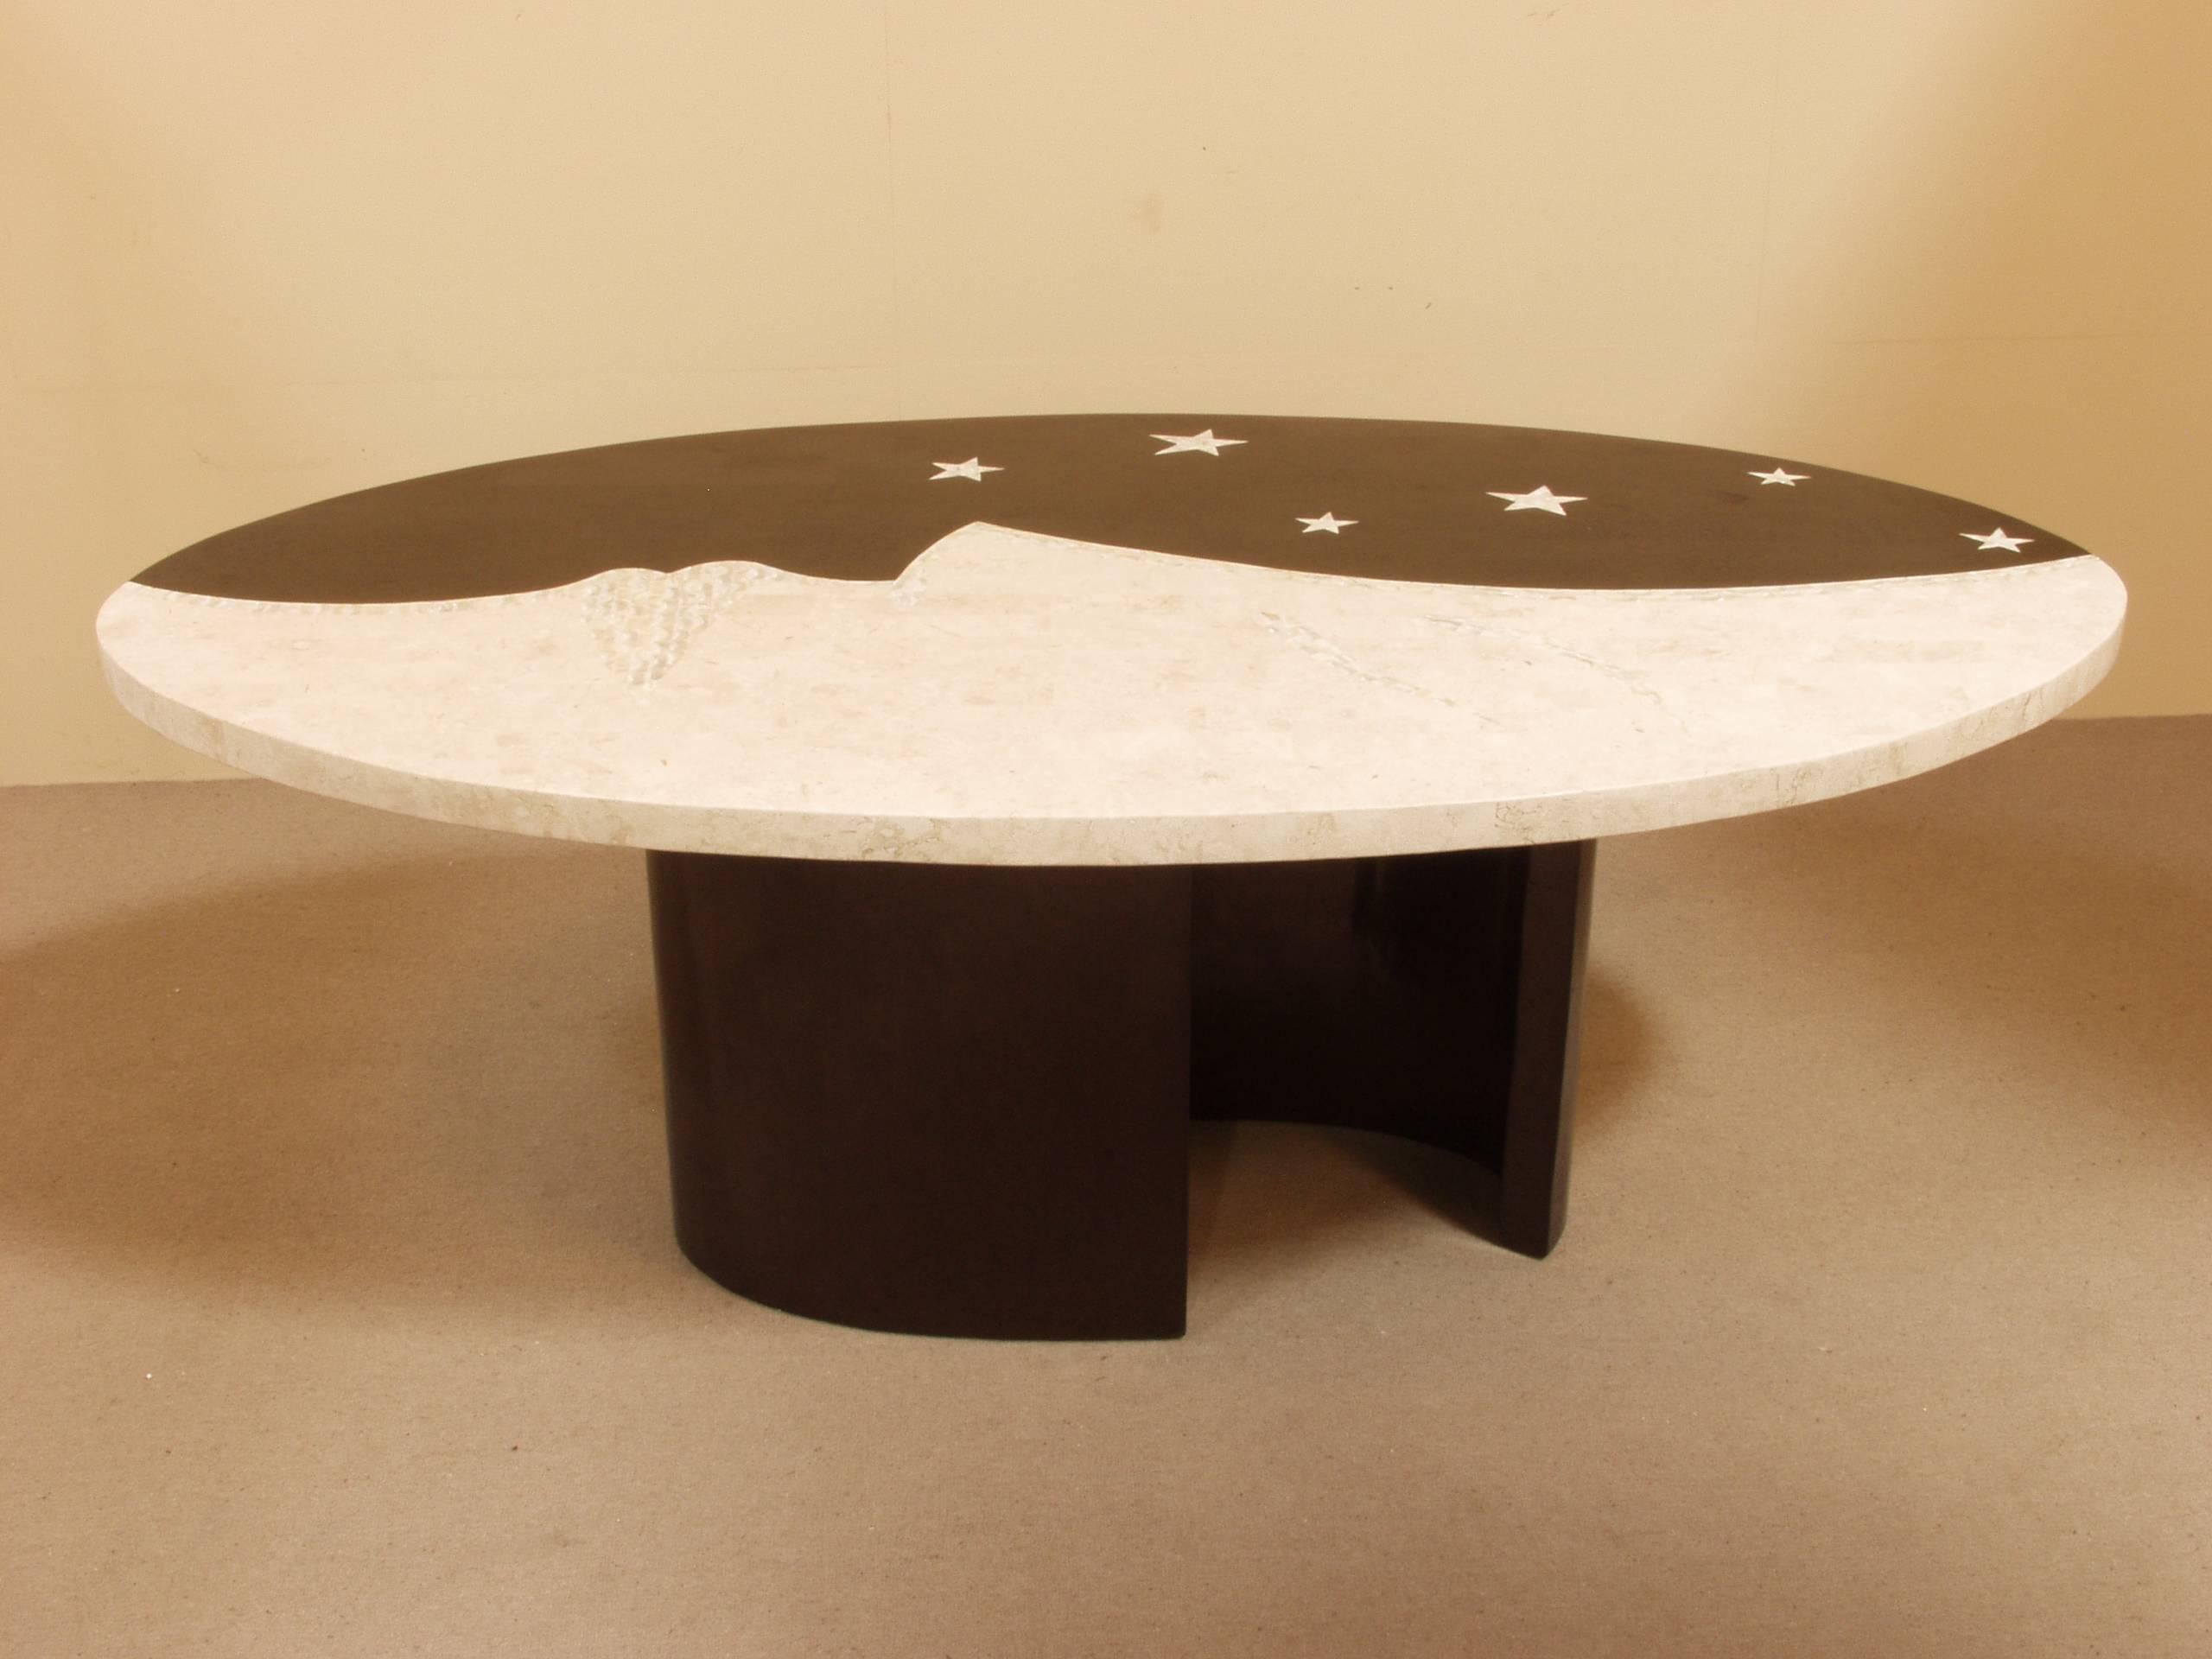 Whimsical dining table with half moon and stars inlaid into top. Table covered in tessellated white and black stone, accented with trocca seashell inlay.

All furnishings are made from 100% natural Fossil Stone or Seashell inlay, carefully hand cut